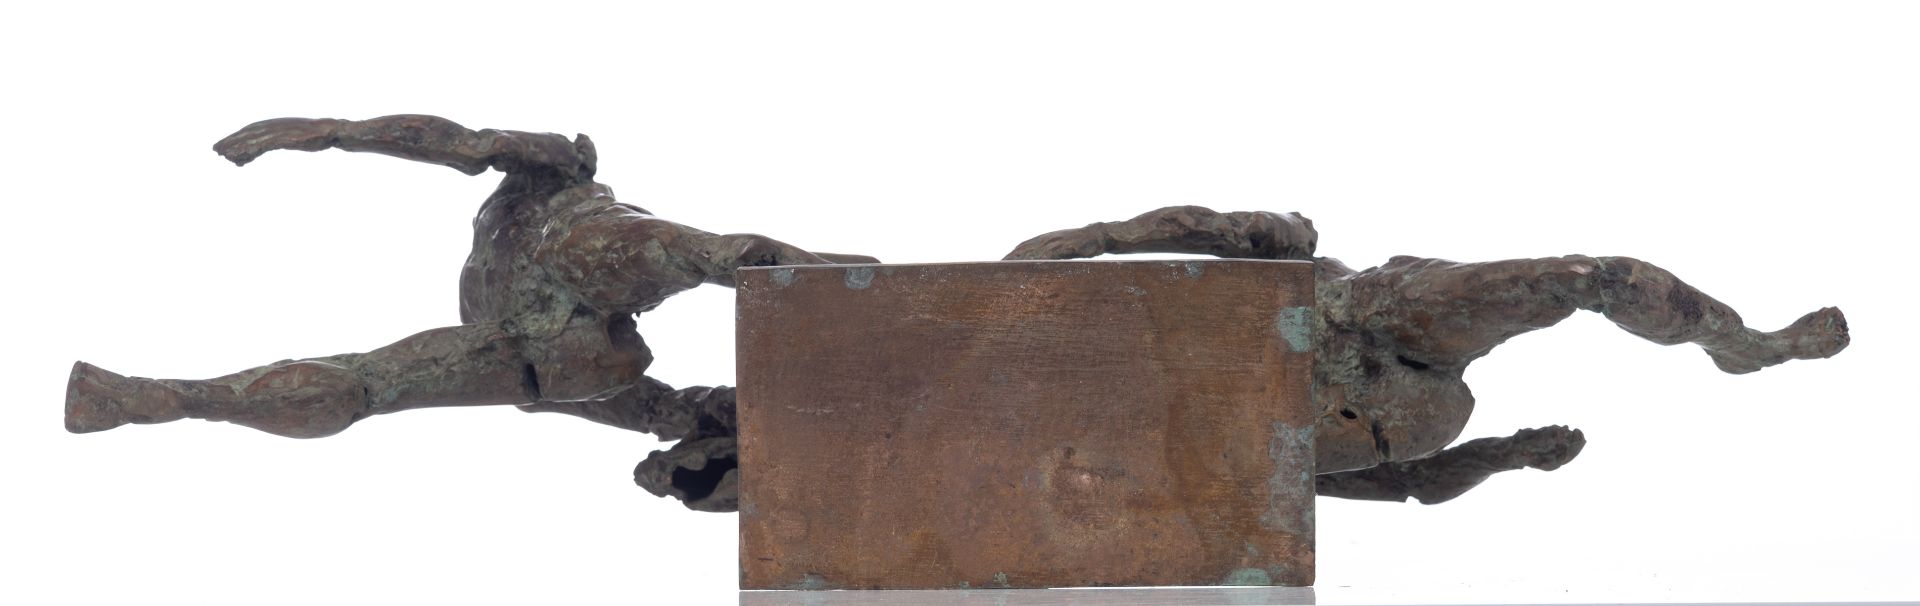 Desmaret J., three runners, N° 4/8, green and brown patinated bronze, H 45 - W 75,5 cm Is possibly s - Image 6 of 8